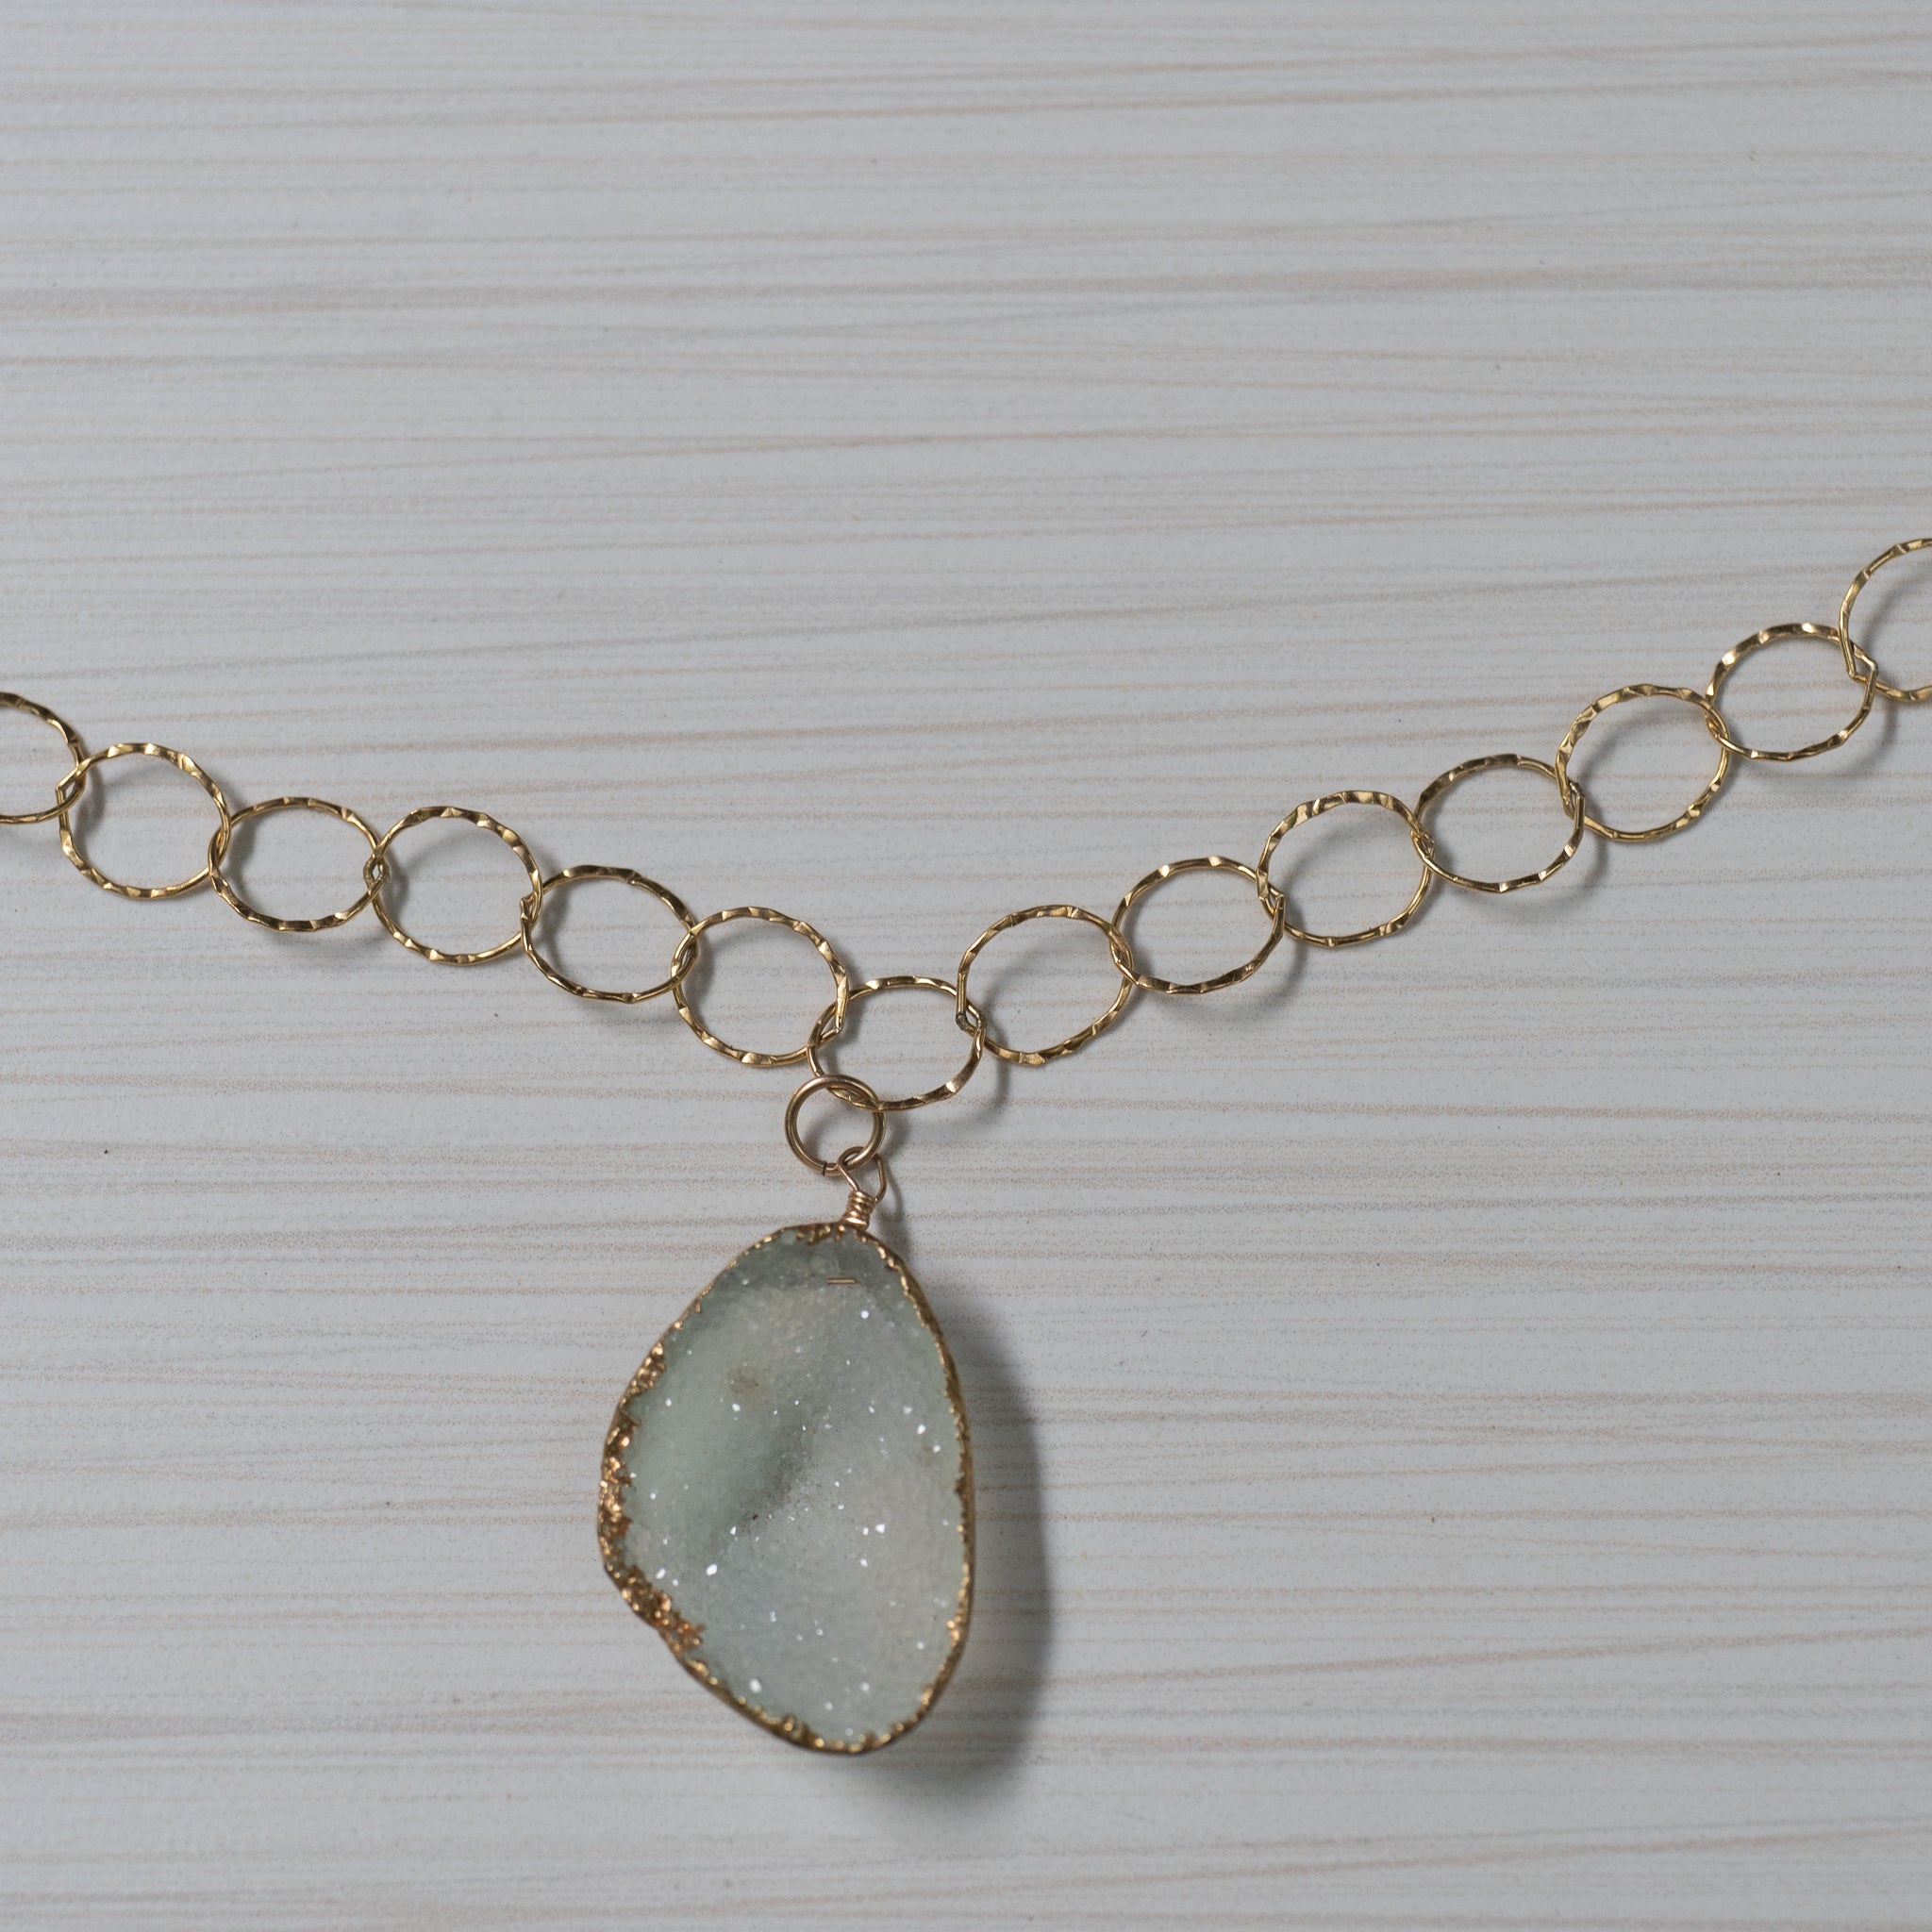 Blue druzy on gold chain necklace handmade in Hawaii by eve black jewelry  Edit alt text